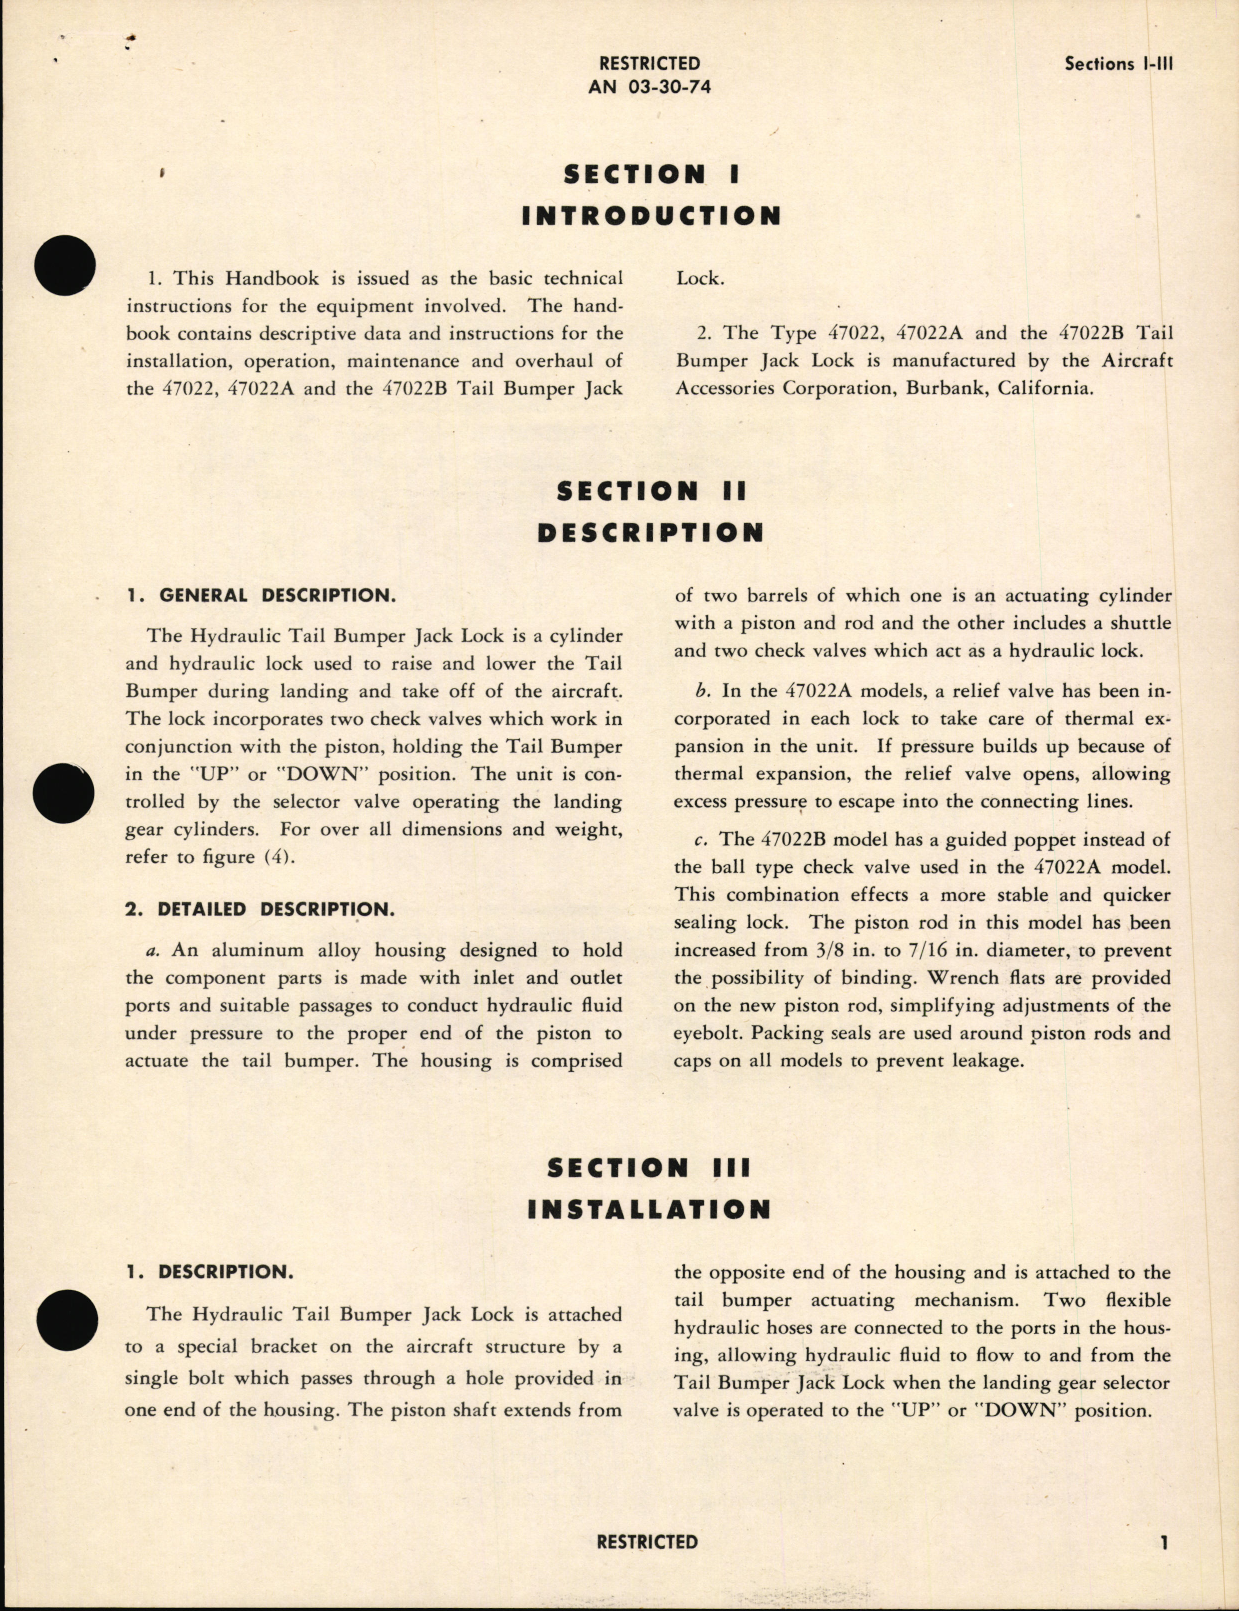 Sample page 5 from AirCorps Library document: Handbook of Instructions with Parts Catalog for Tail Bumper Jack Lock